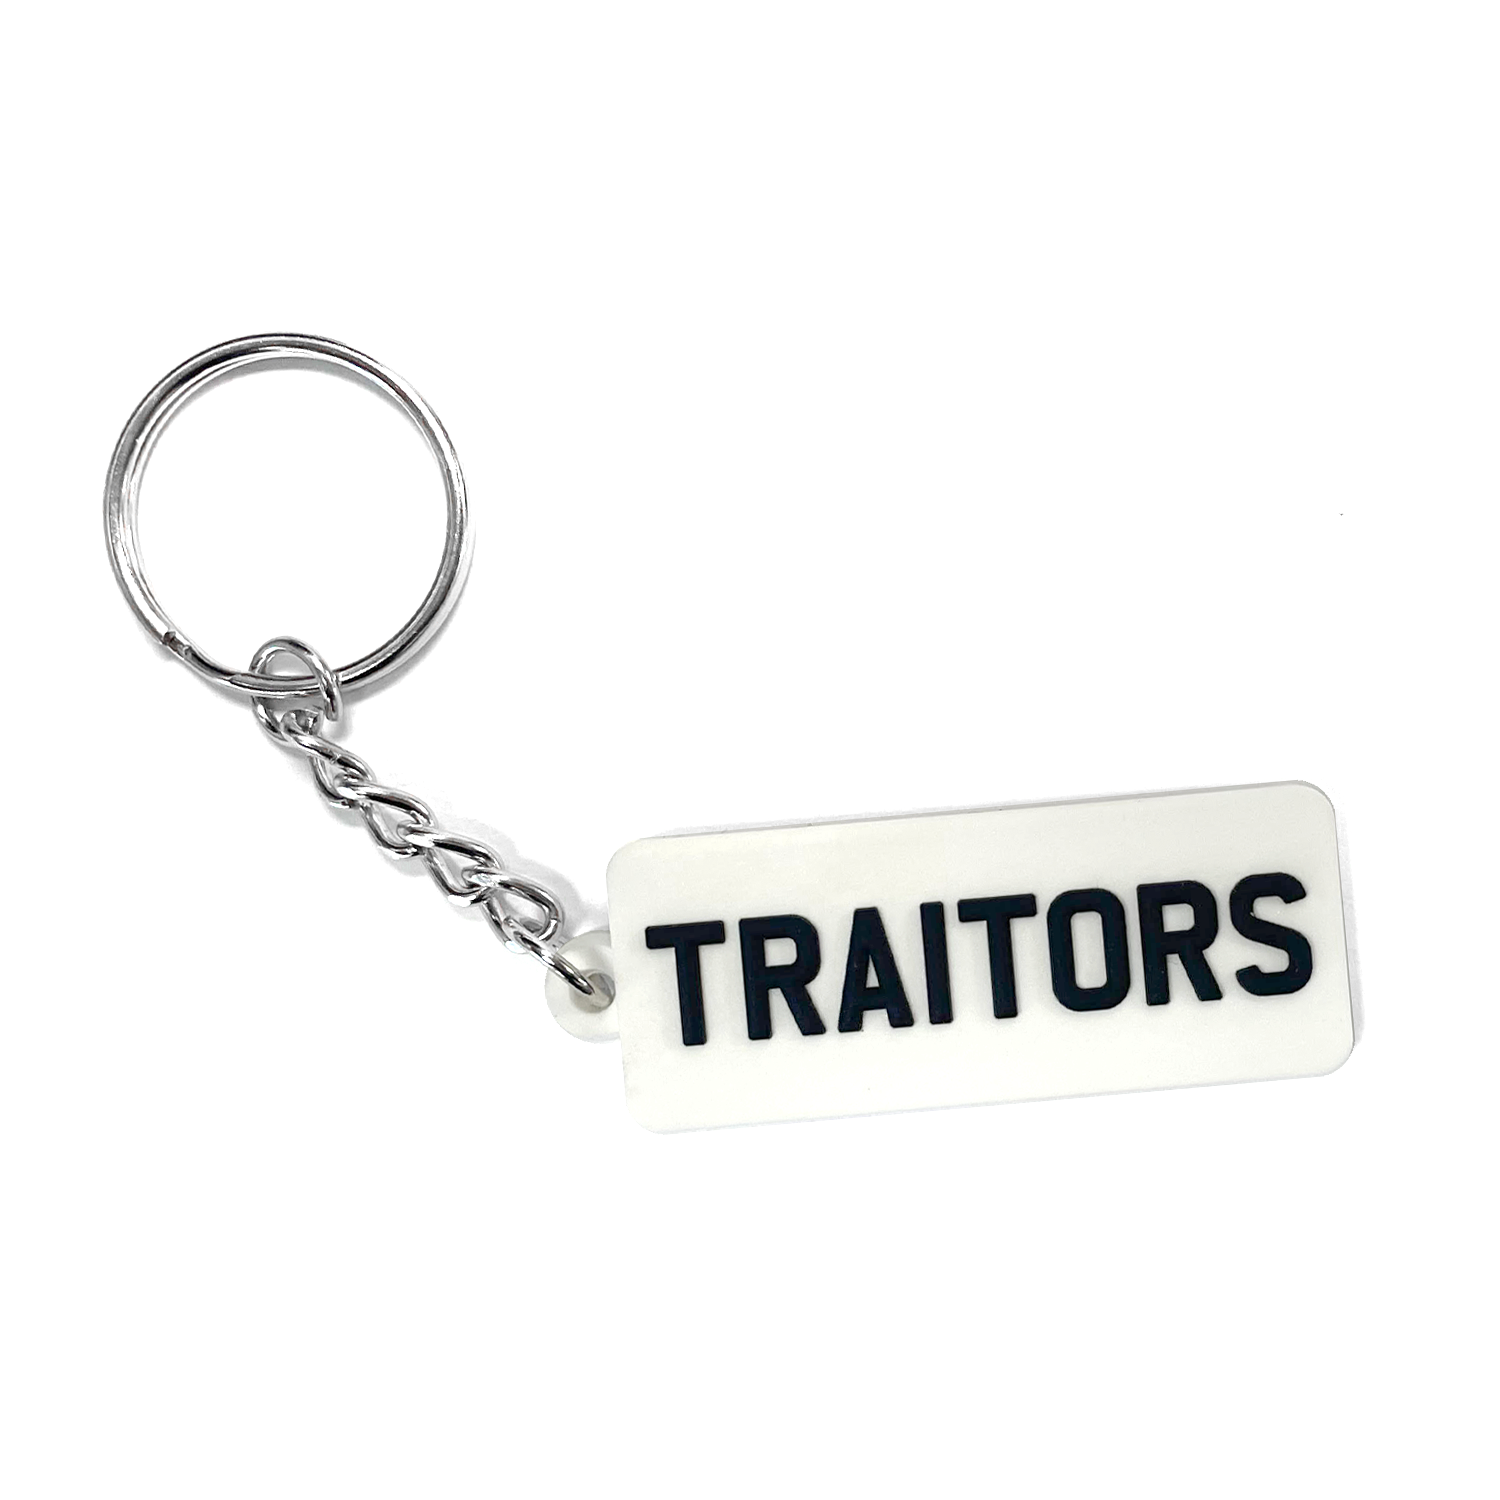 The Traitors Number Plate Keyring